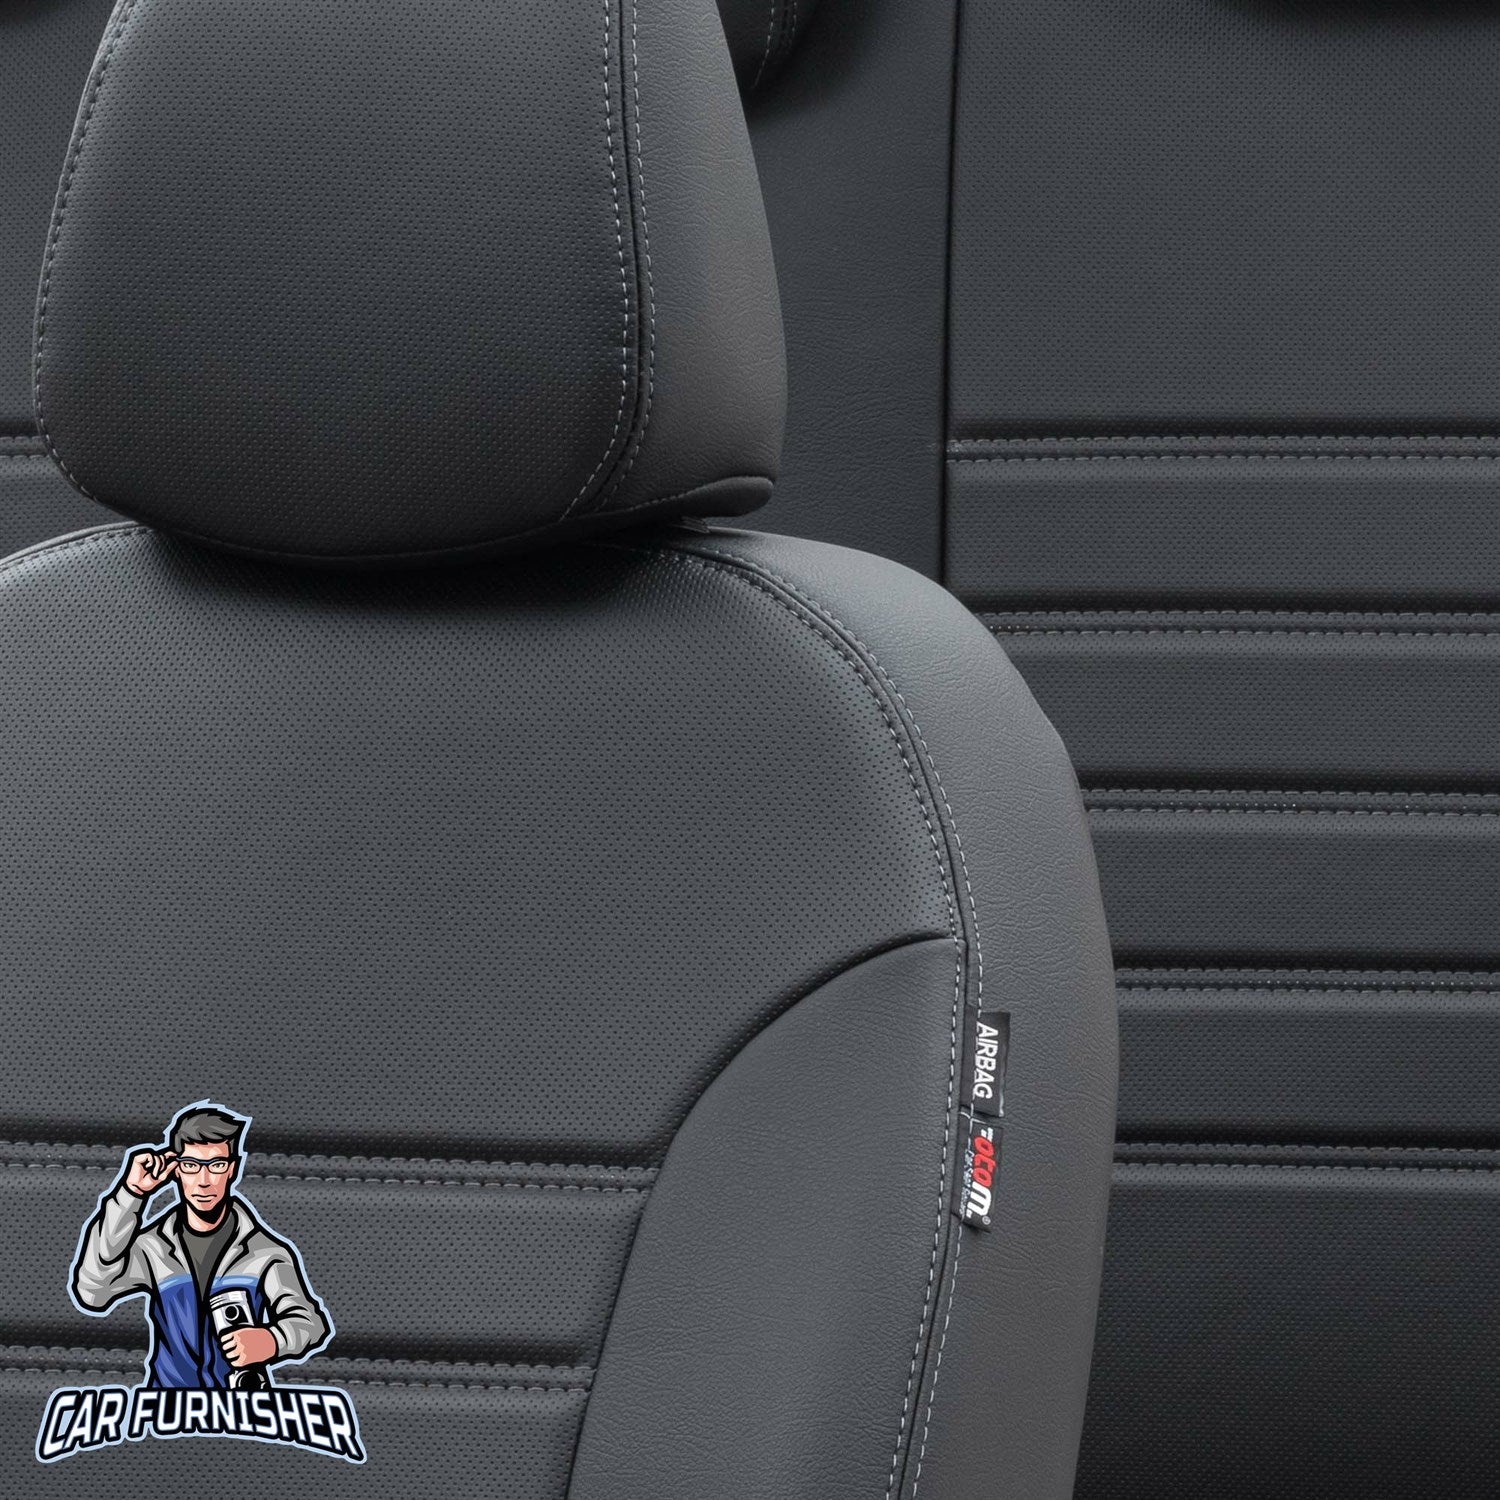 Ssangyong Kyron Seat Covers Istanbul Leather Design Black Leather